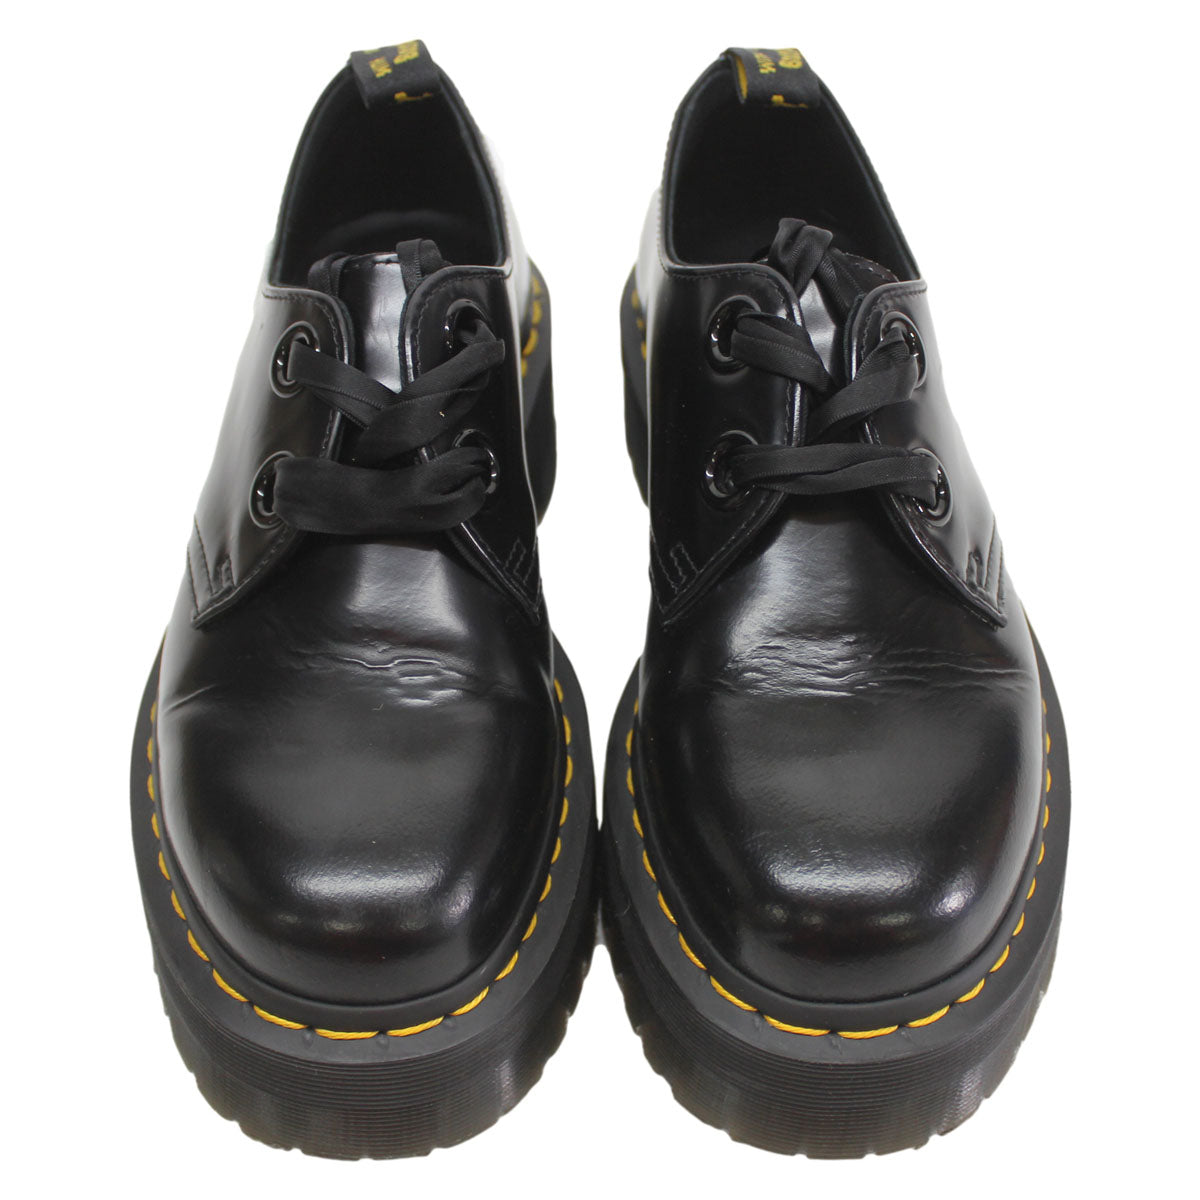 Dr. Martens Womens Holly Buttero Leather Shoes - UK 6